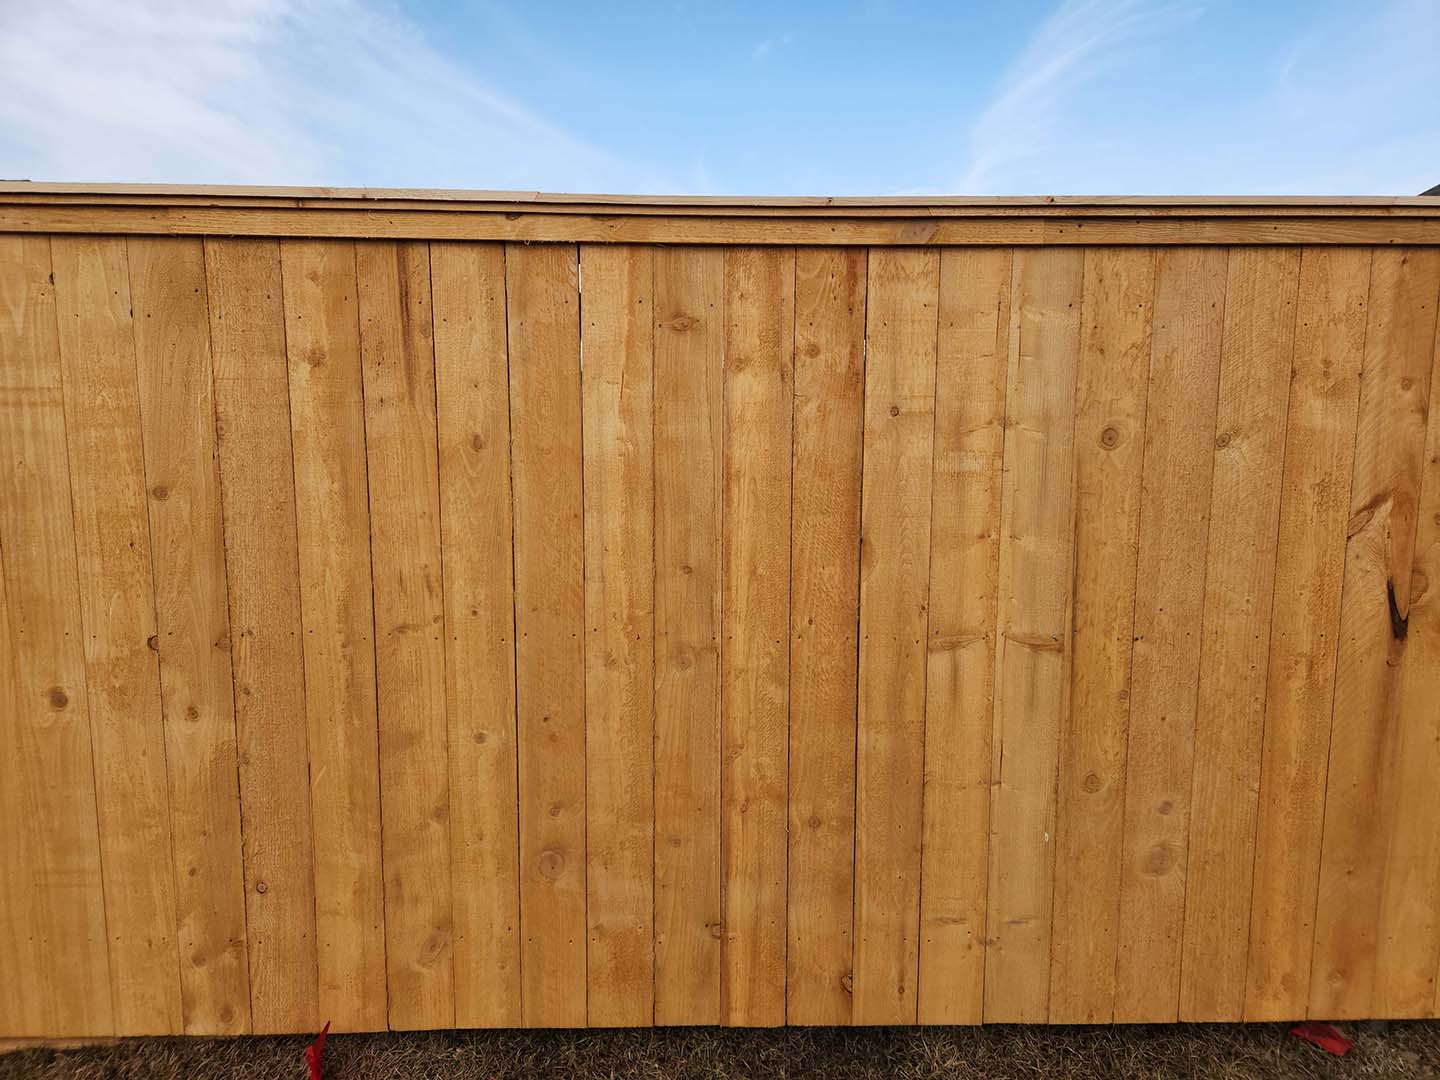 Wood cap and trim fence company in Slidell Louisiana